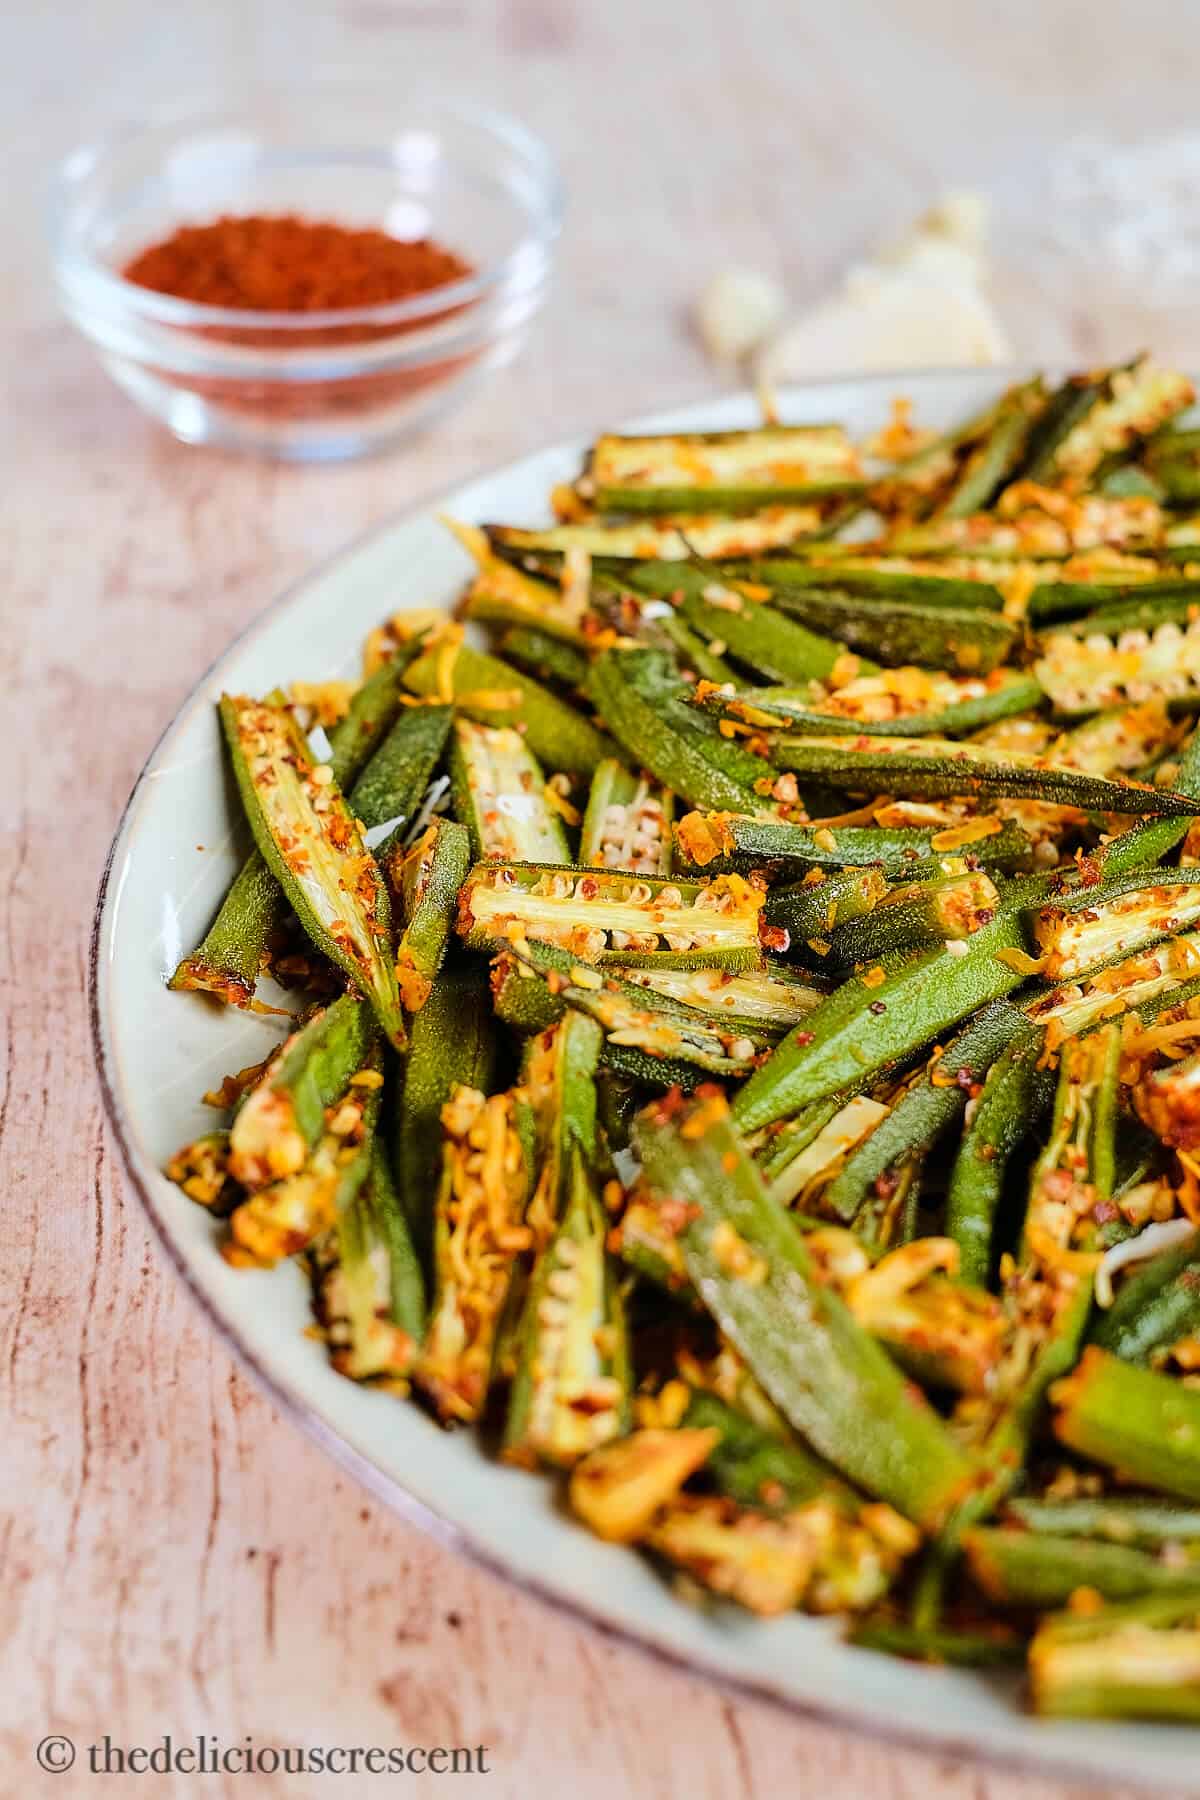 Roasted okra seasoned with spices and served on a plate.